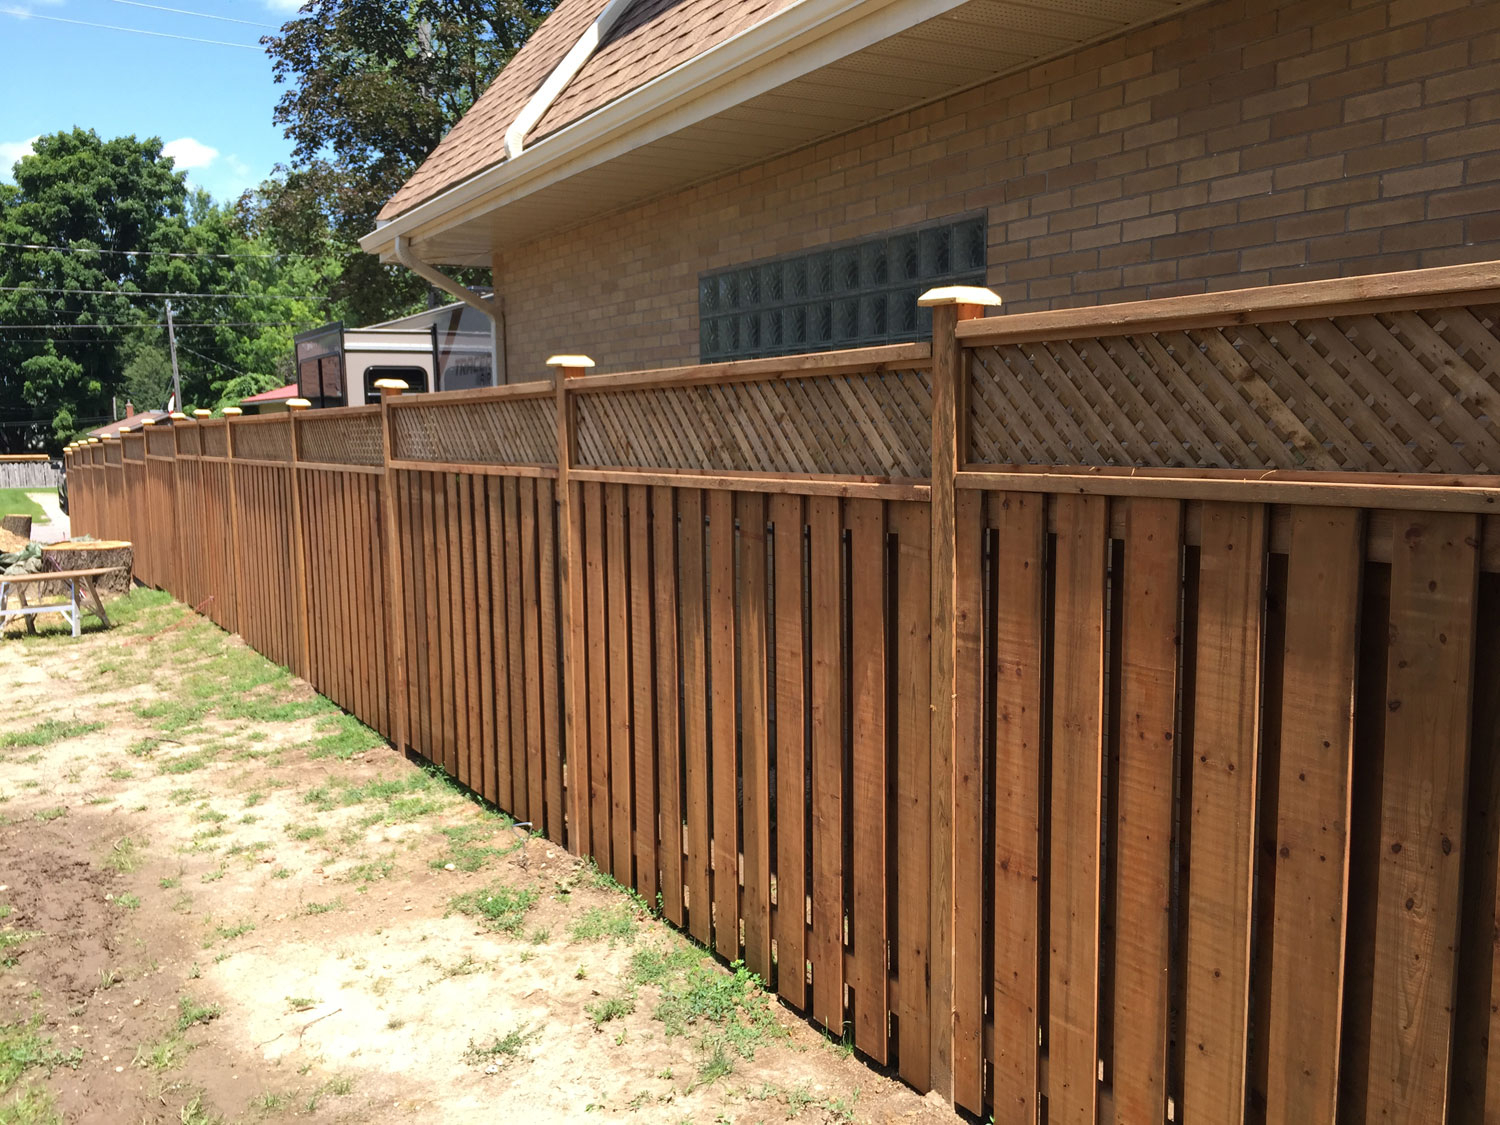 Rules For Putting Up A Privacy Fence • Fence Ideas Site